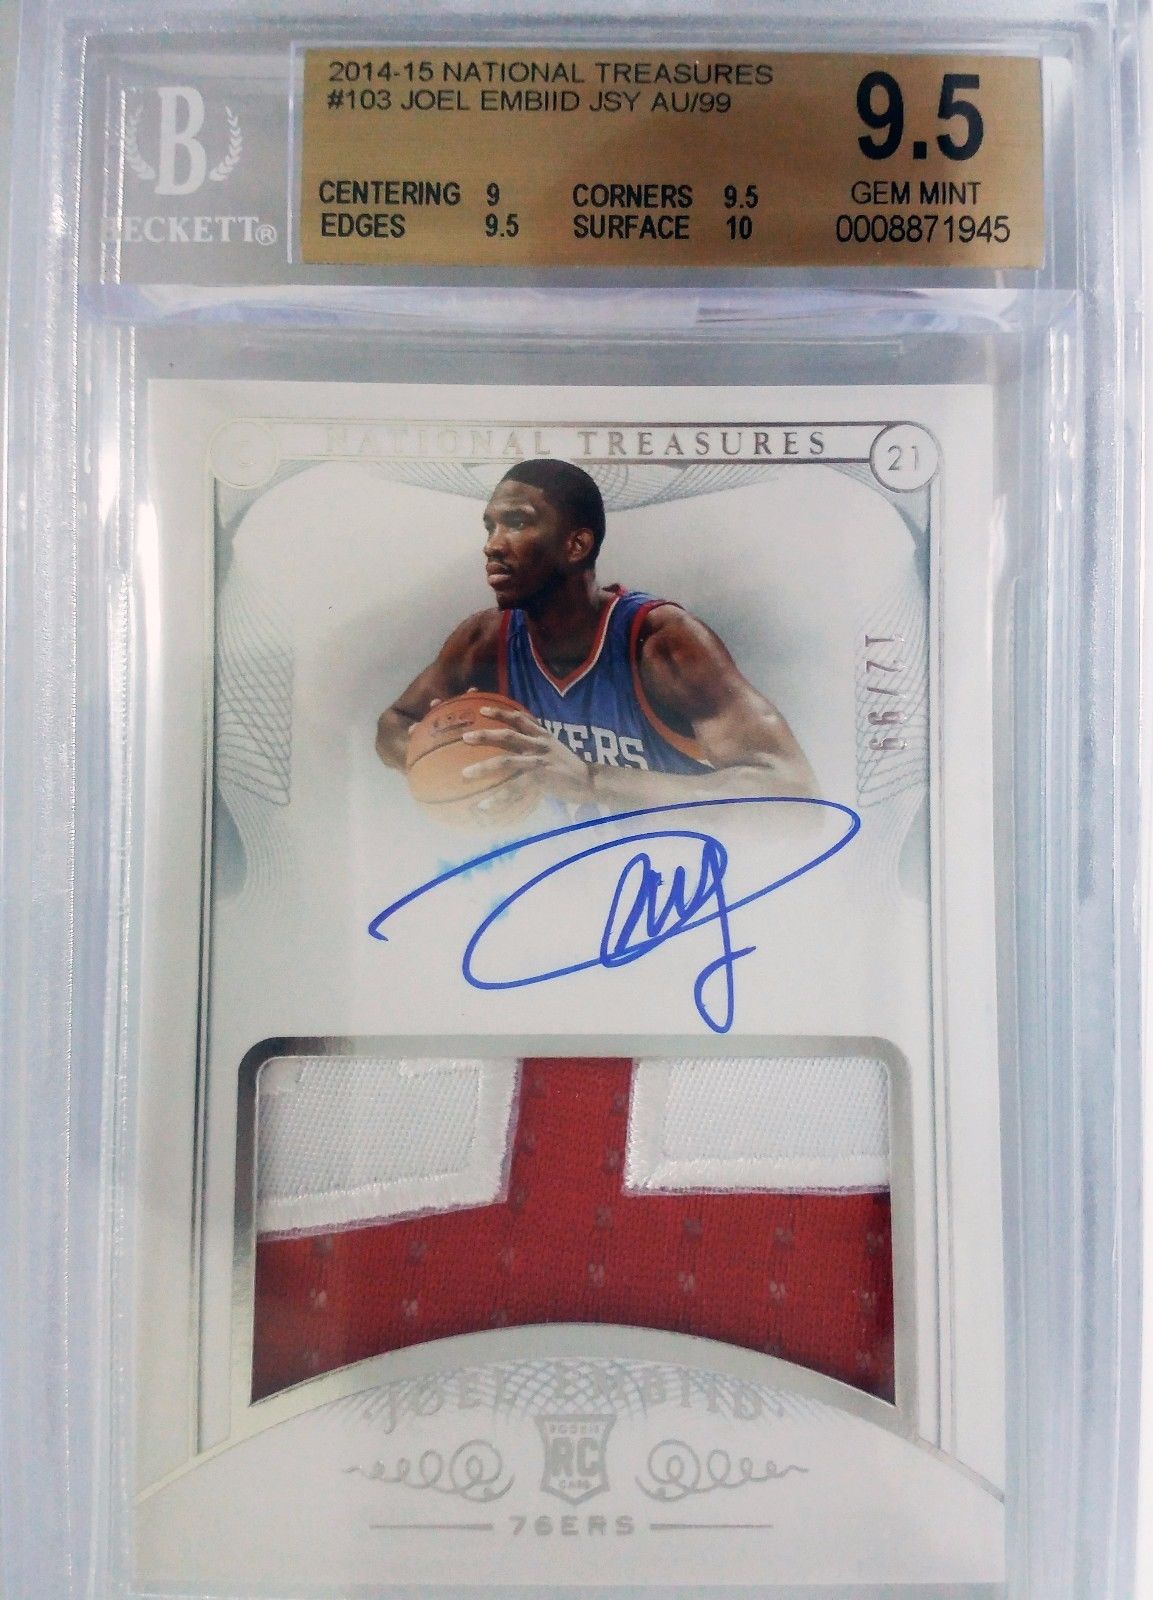 JOEL EMBIID 201415 NATIONAL TREASURES RC BLUE AUTO 76ERS PATCH 1299 BGS9510